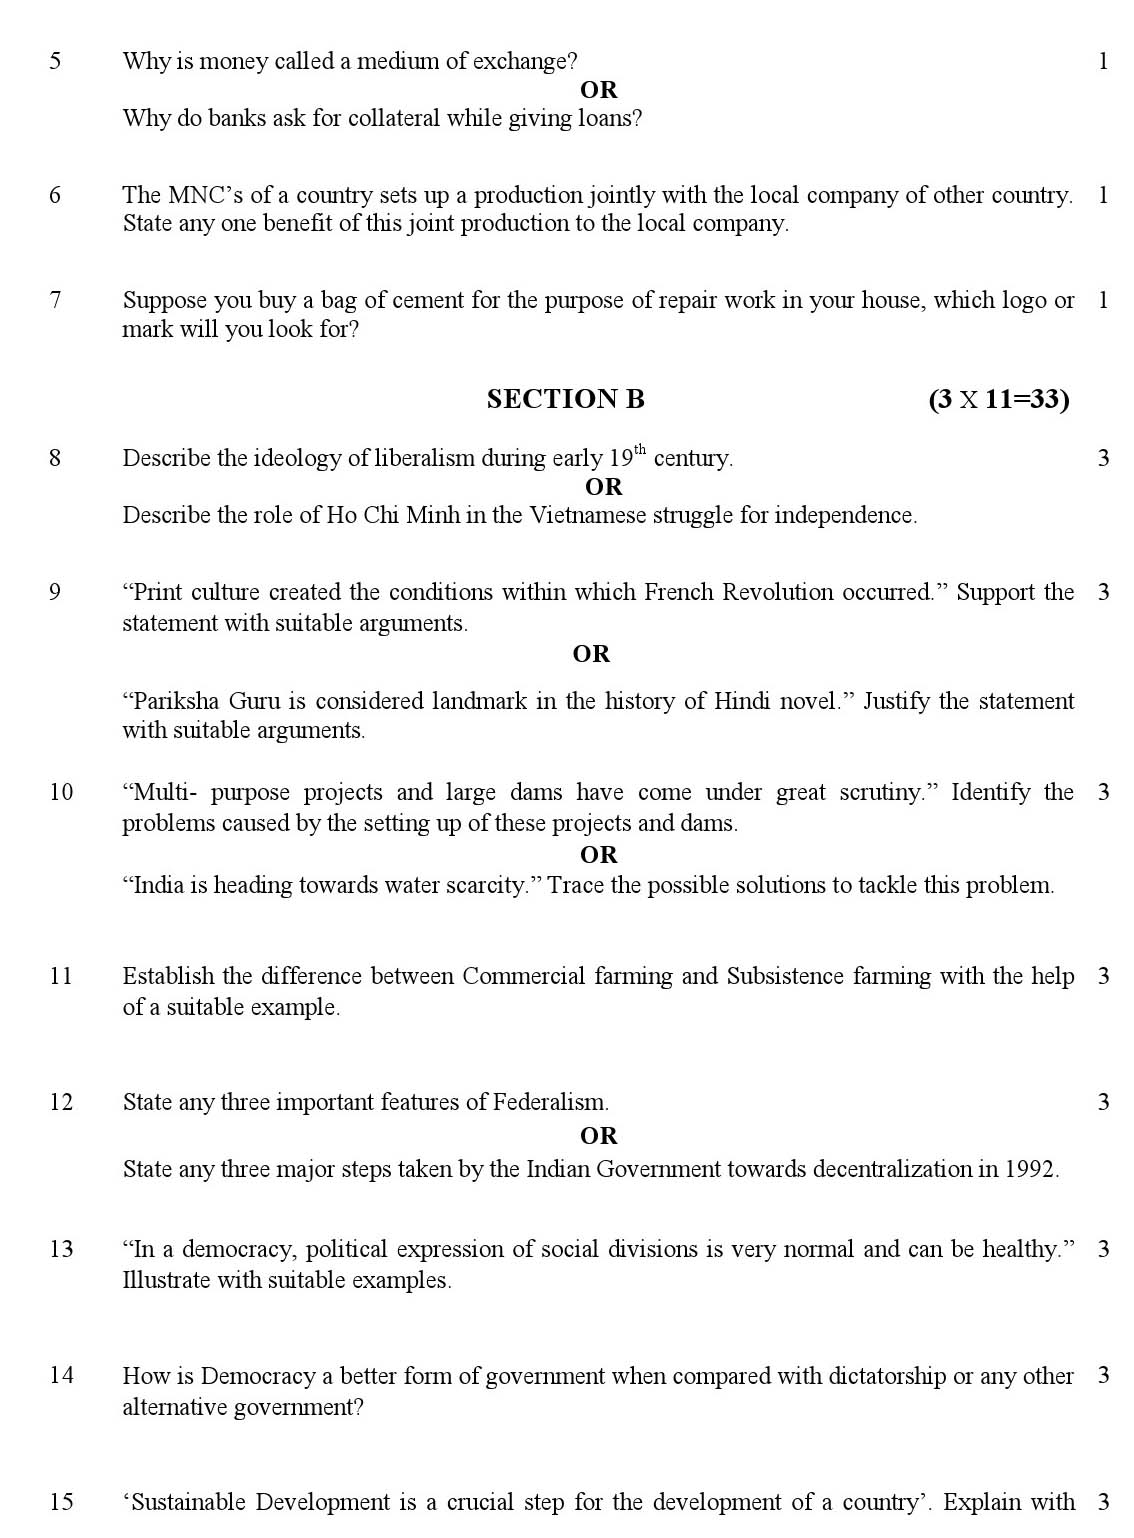 Social Science CBSE Class X Sample Question Paper 2018-19 - Image 2